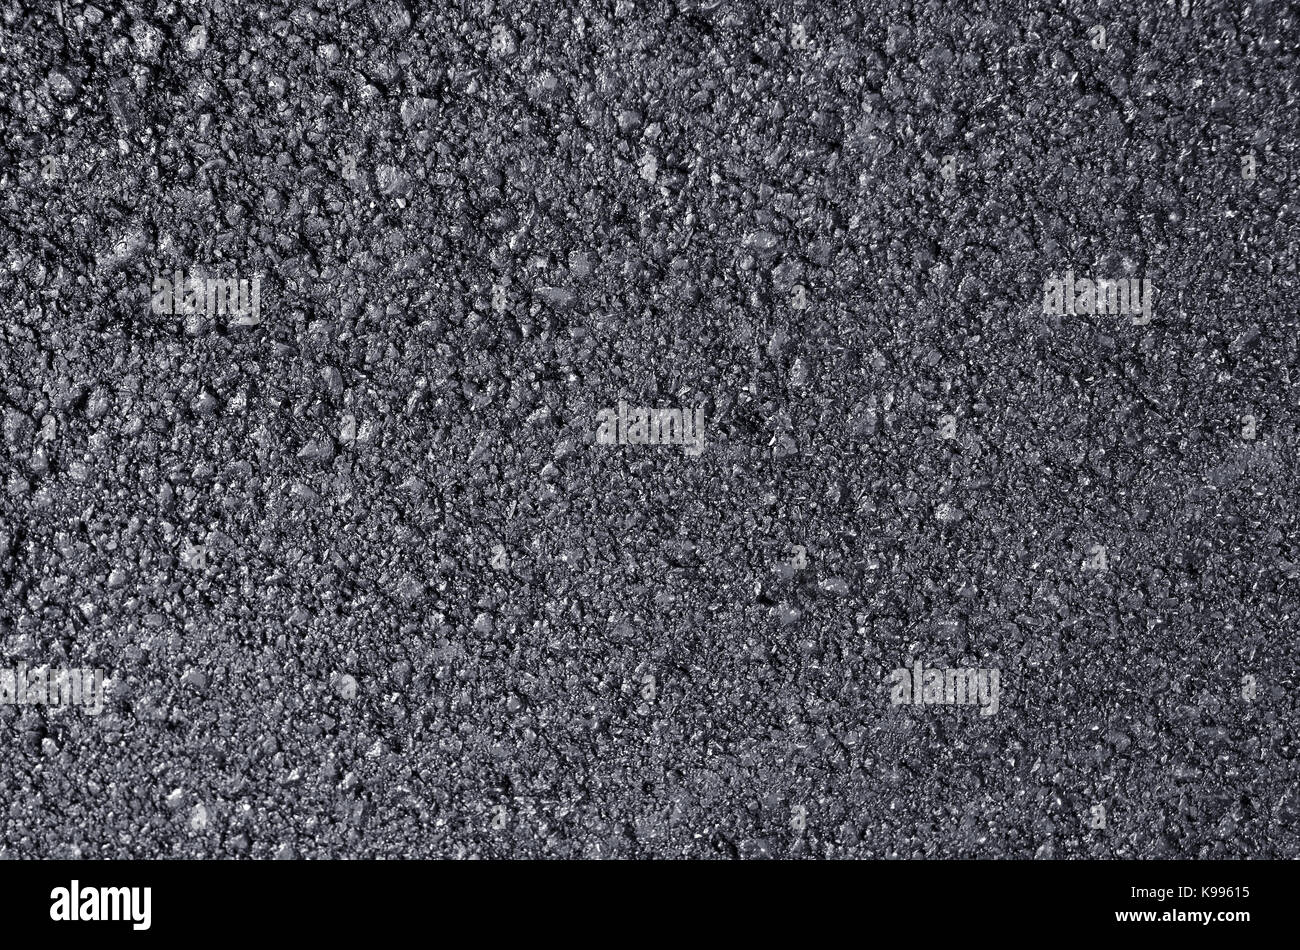 Asphalt as abstract background or backdrop Stock Photo